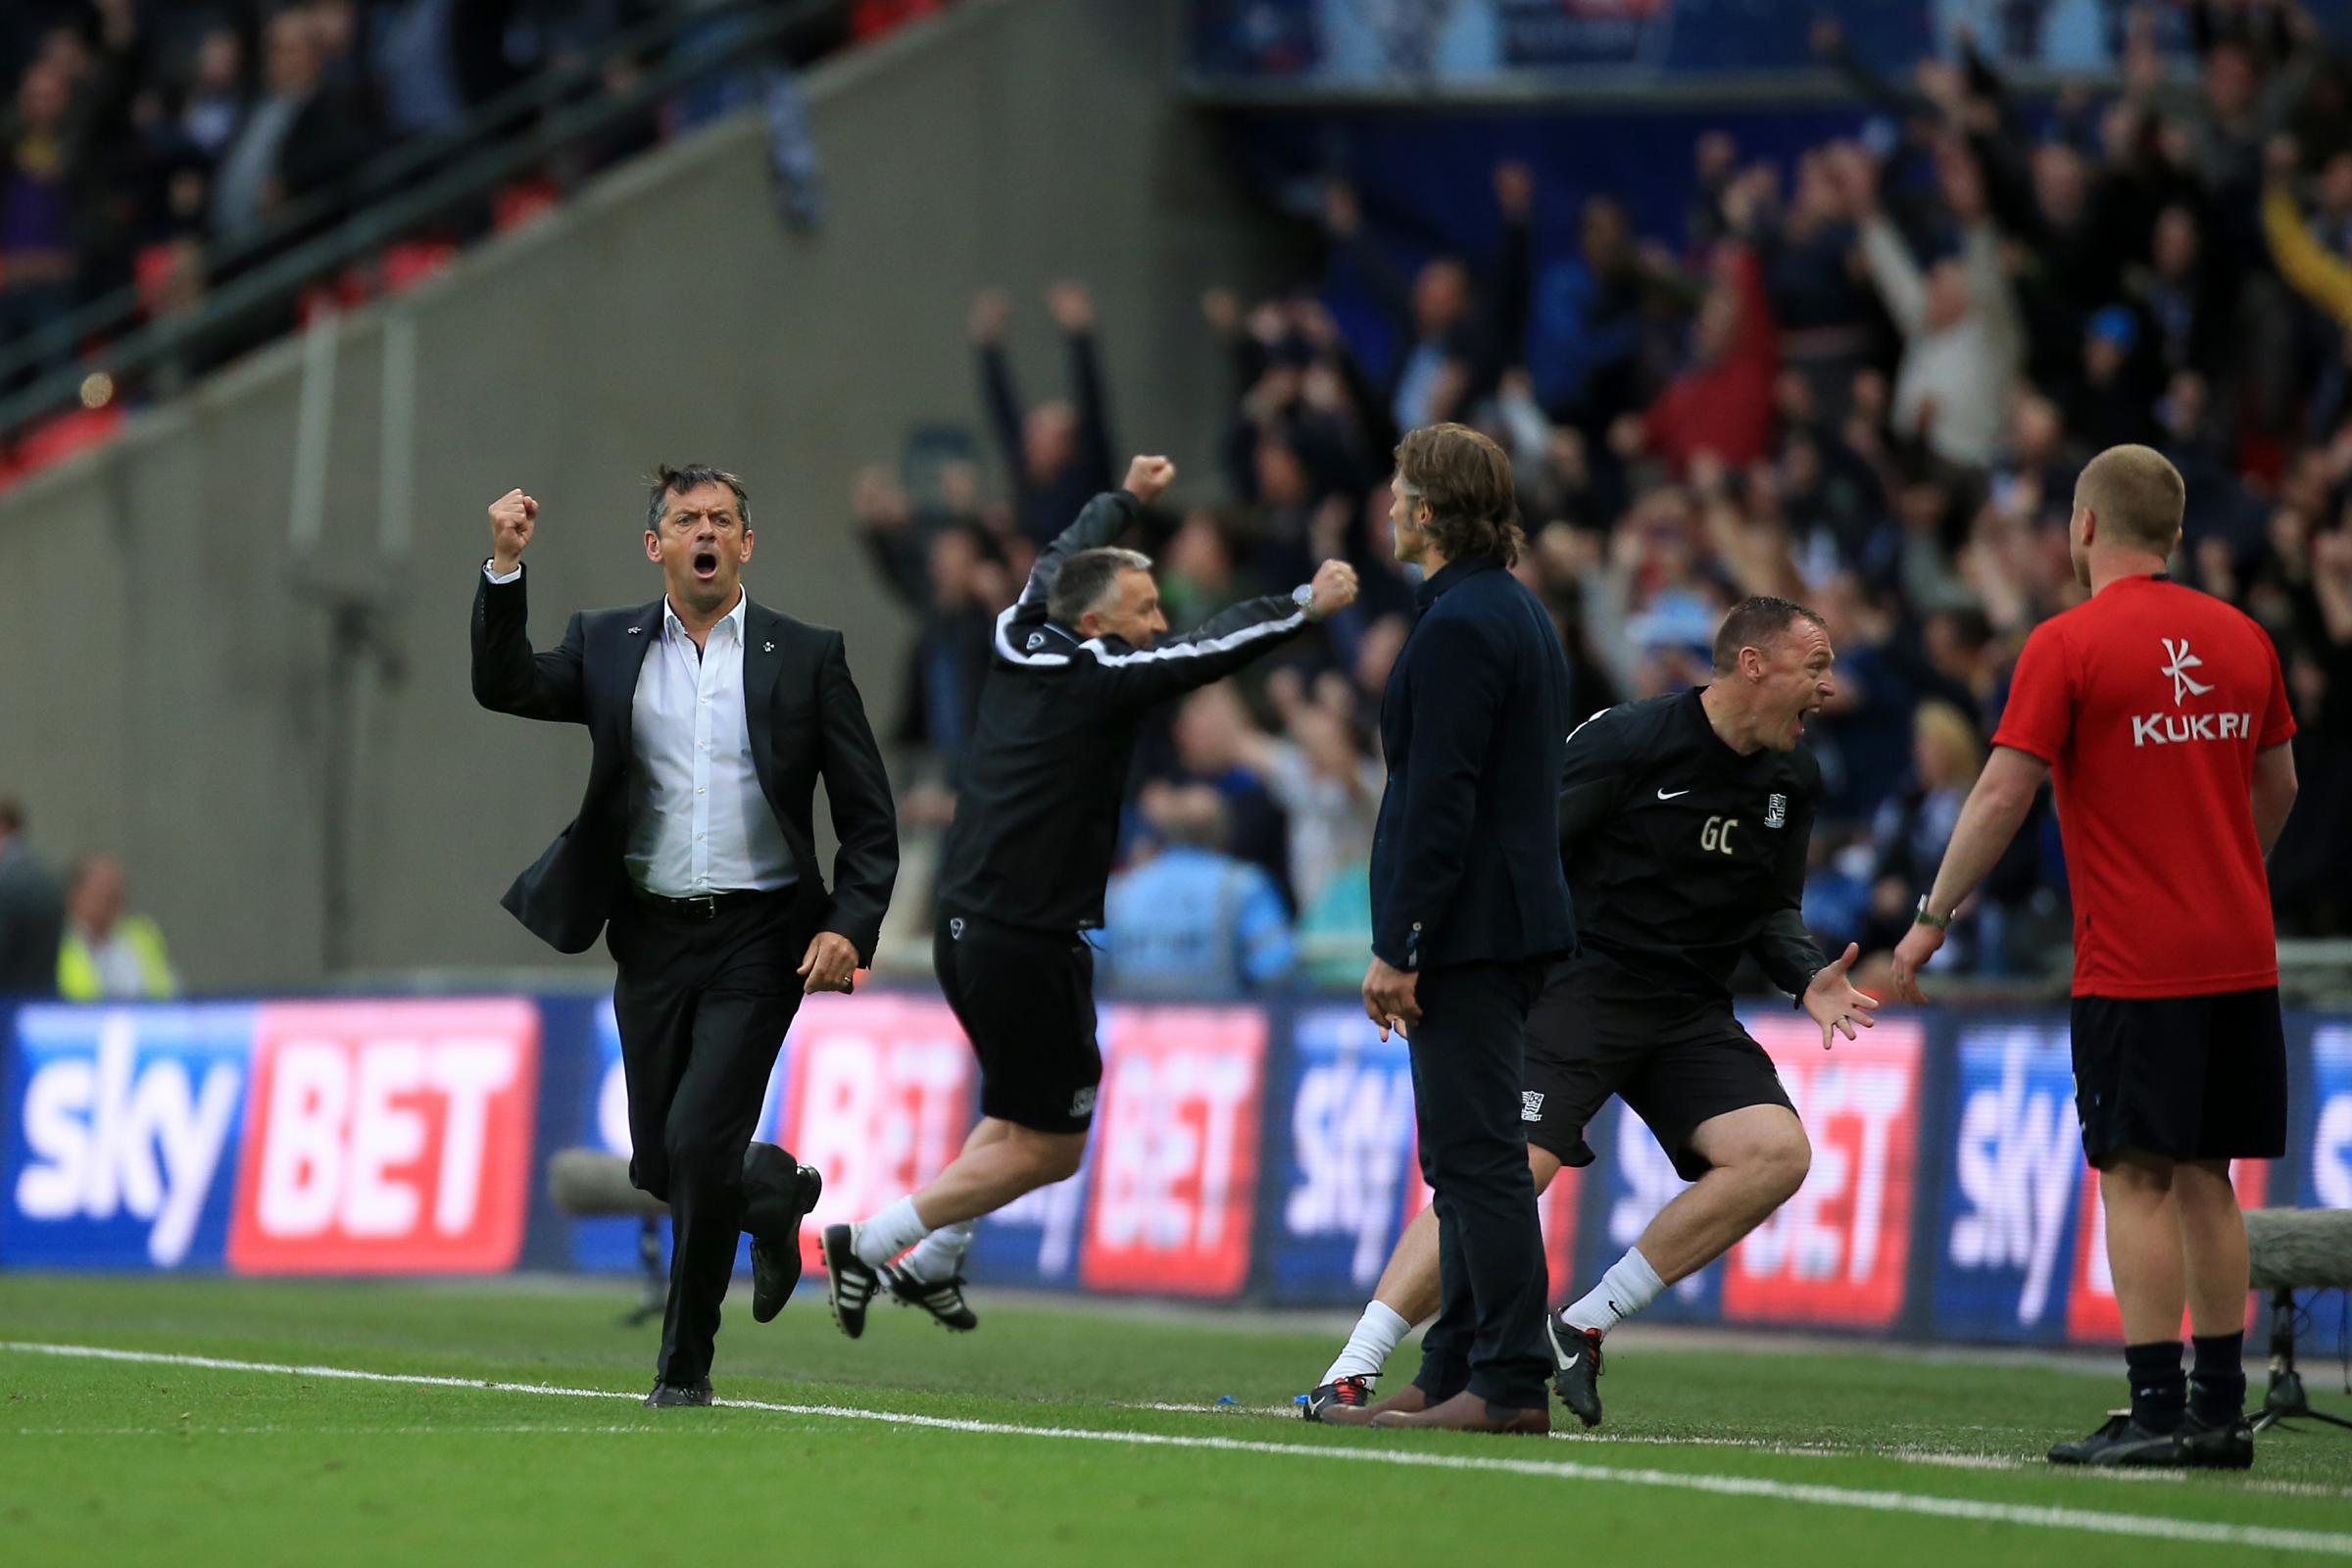 Jovial - Phil Brown runs onto the Wembley pitch after Joe Pigotts play-off final strike against Wycombe Wanderers in May 2015